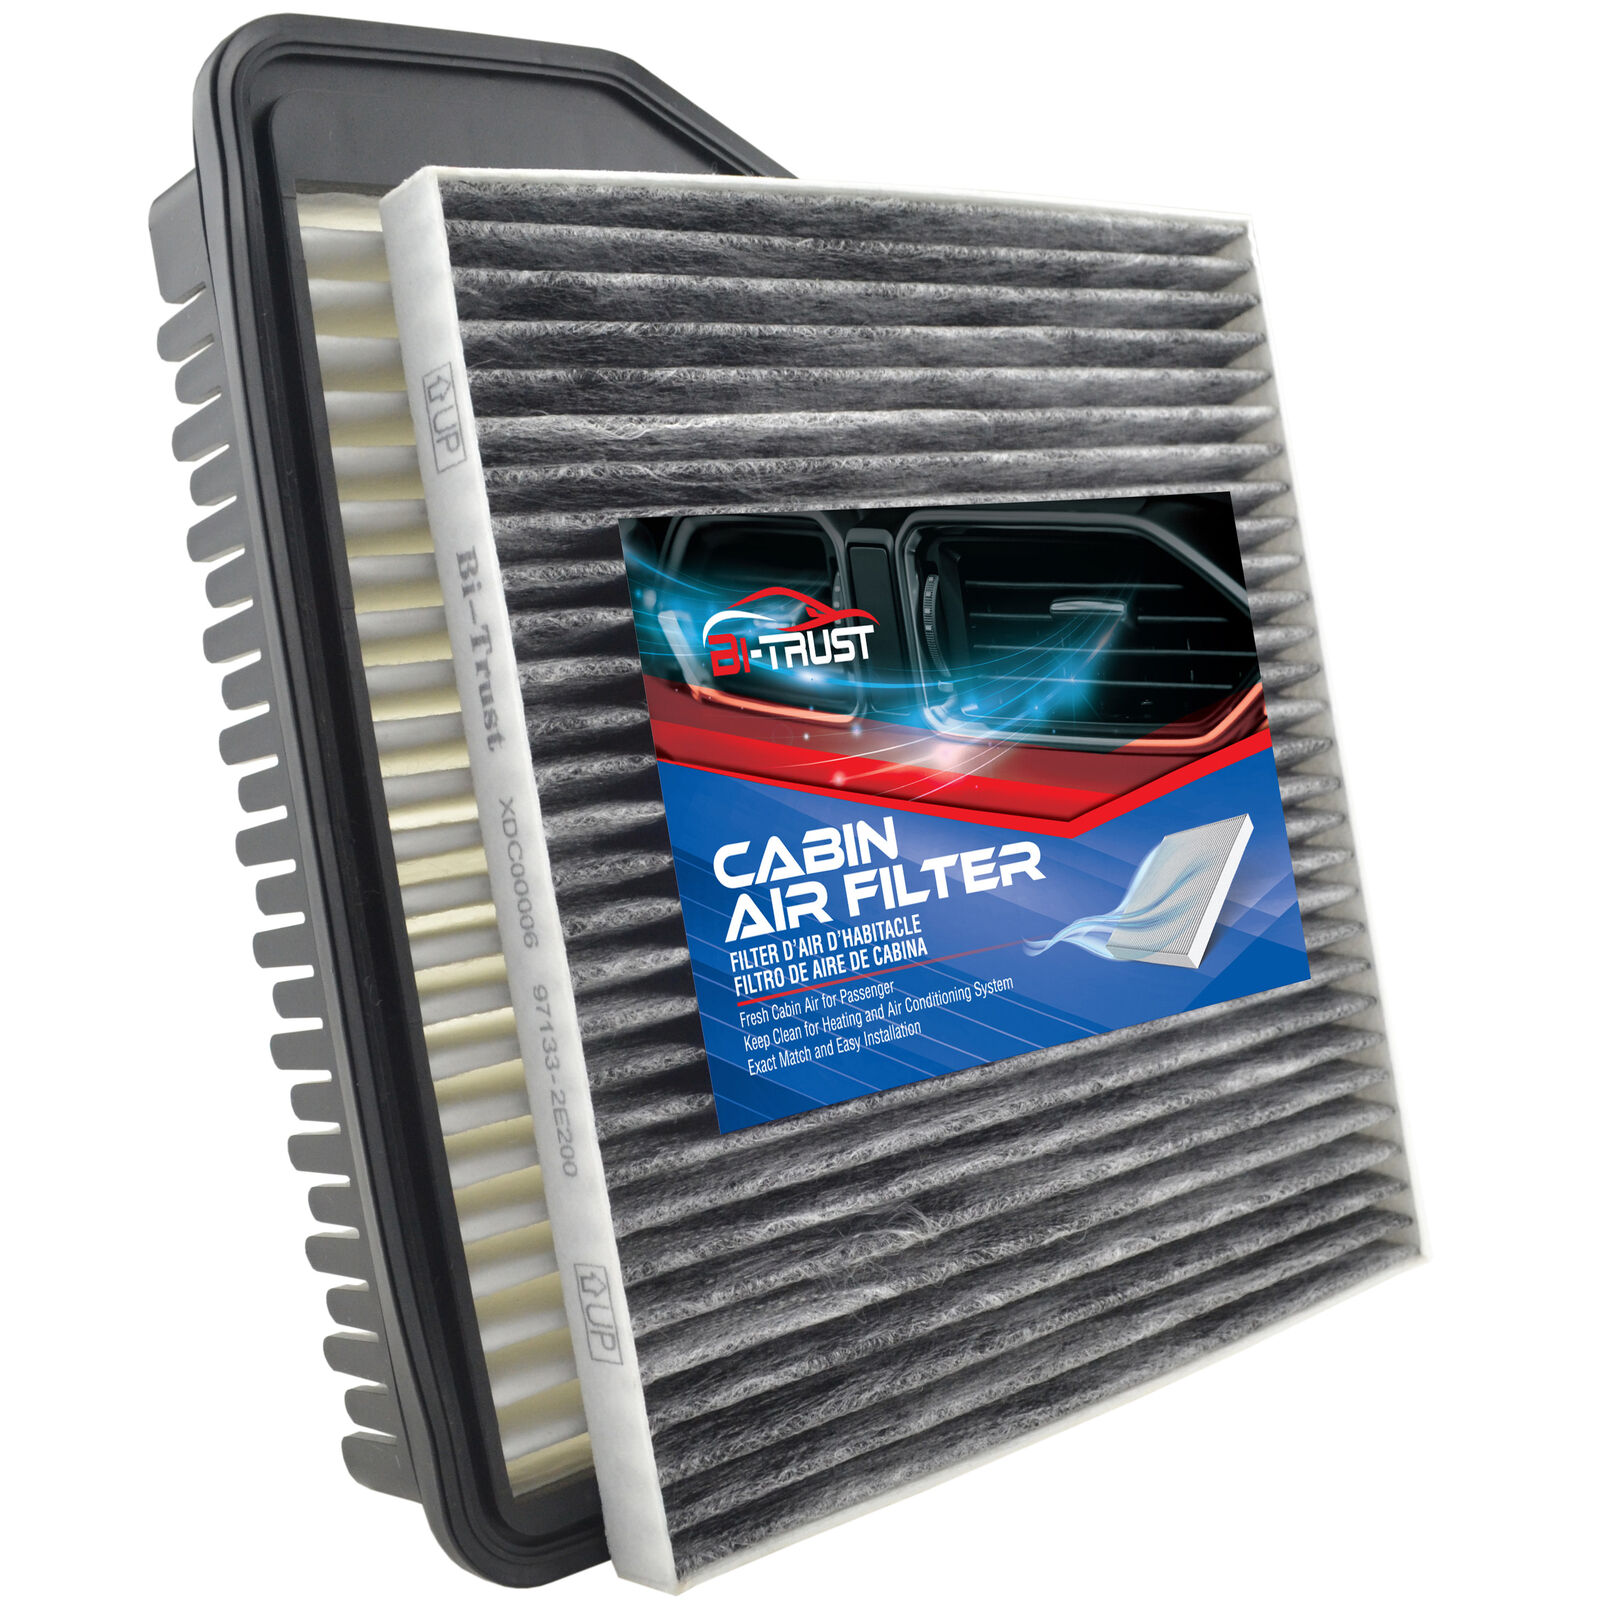 Engine and Cabin Air Filter for Hyundai Tucson 2011-2015 L4 2.0L 2010-2015 2.4L